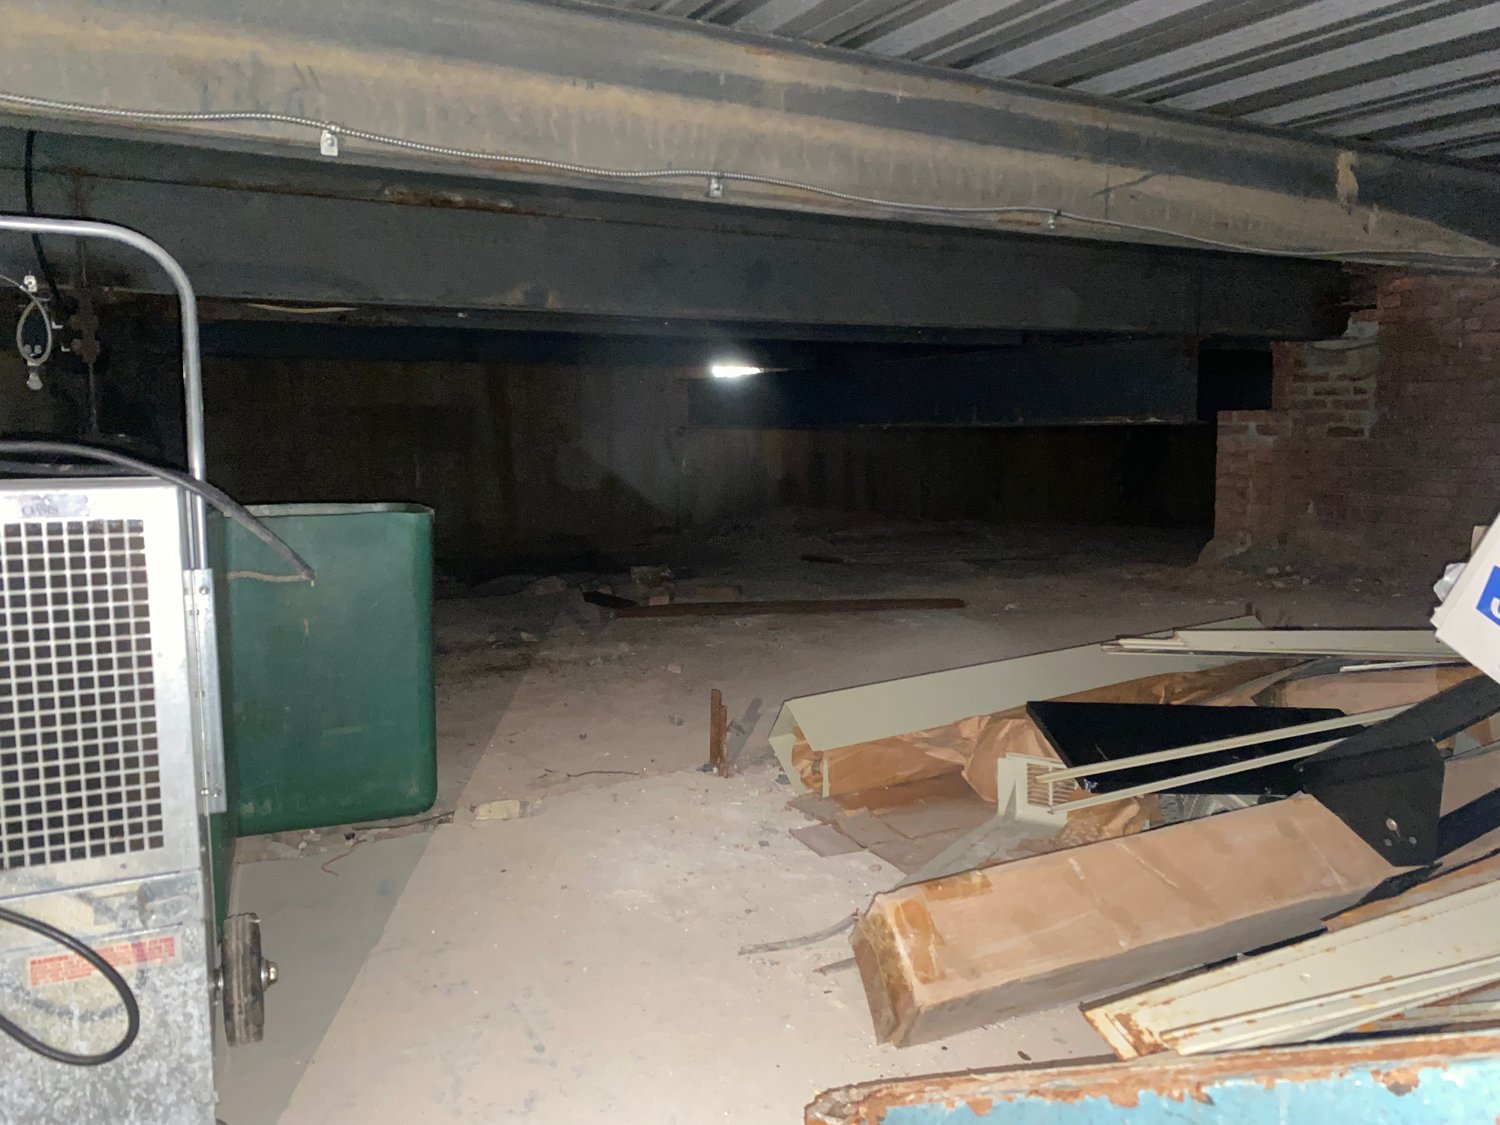 In the basement of Deasy Elementary School, which was built in 1910, an area that was hidden, according to Superintendent Dr. Maria Rianna, has allowed water to enter the building.